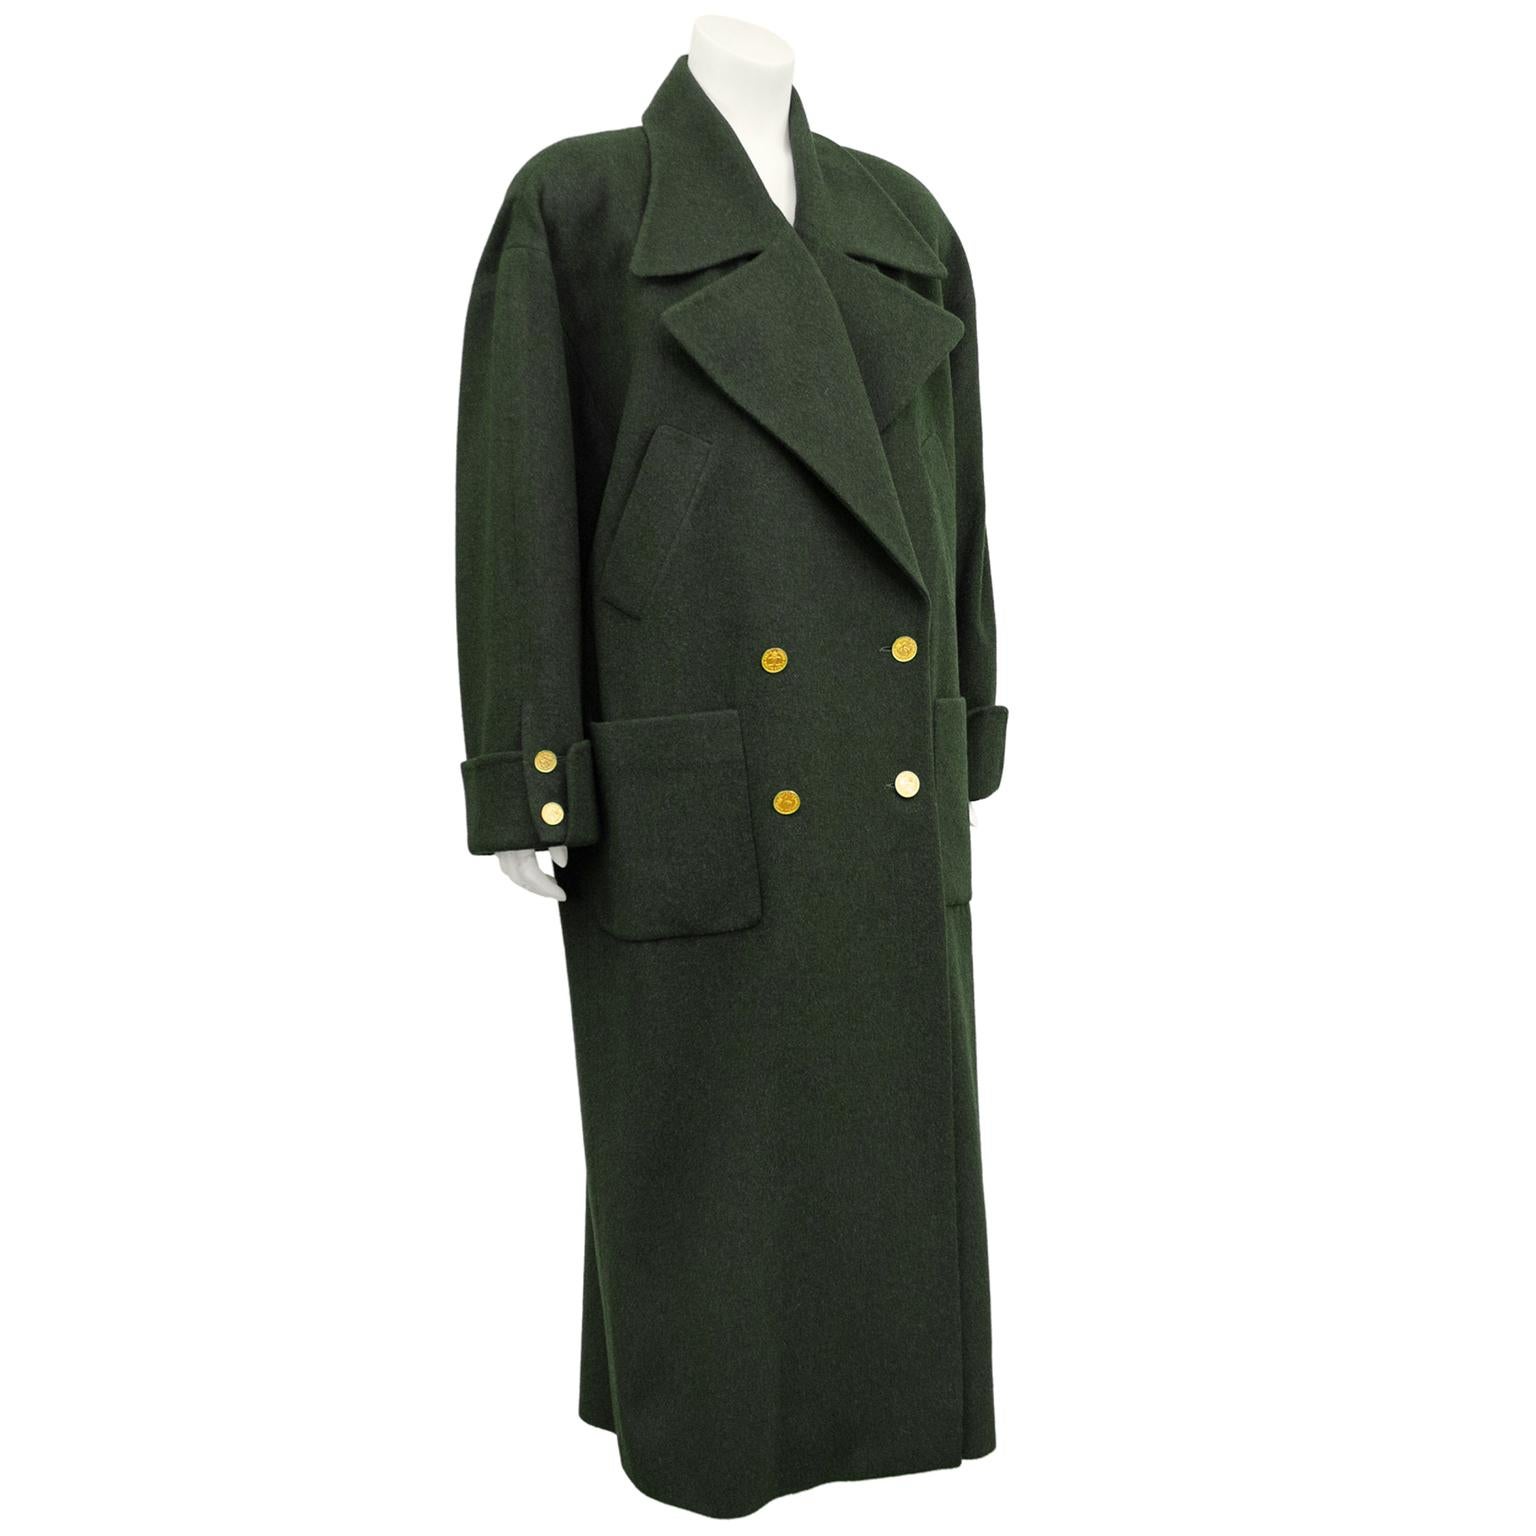 1980s Chanel olive green double breasted trench coat. 100% wool with beautiful gold CC logo and crown buttons. Exaggerated notched collar, slanted slit pockets and large patch pockets at hips. Cuffed at wrists. Corresponding olive green lining.